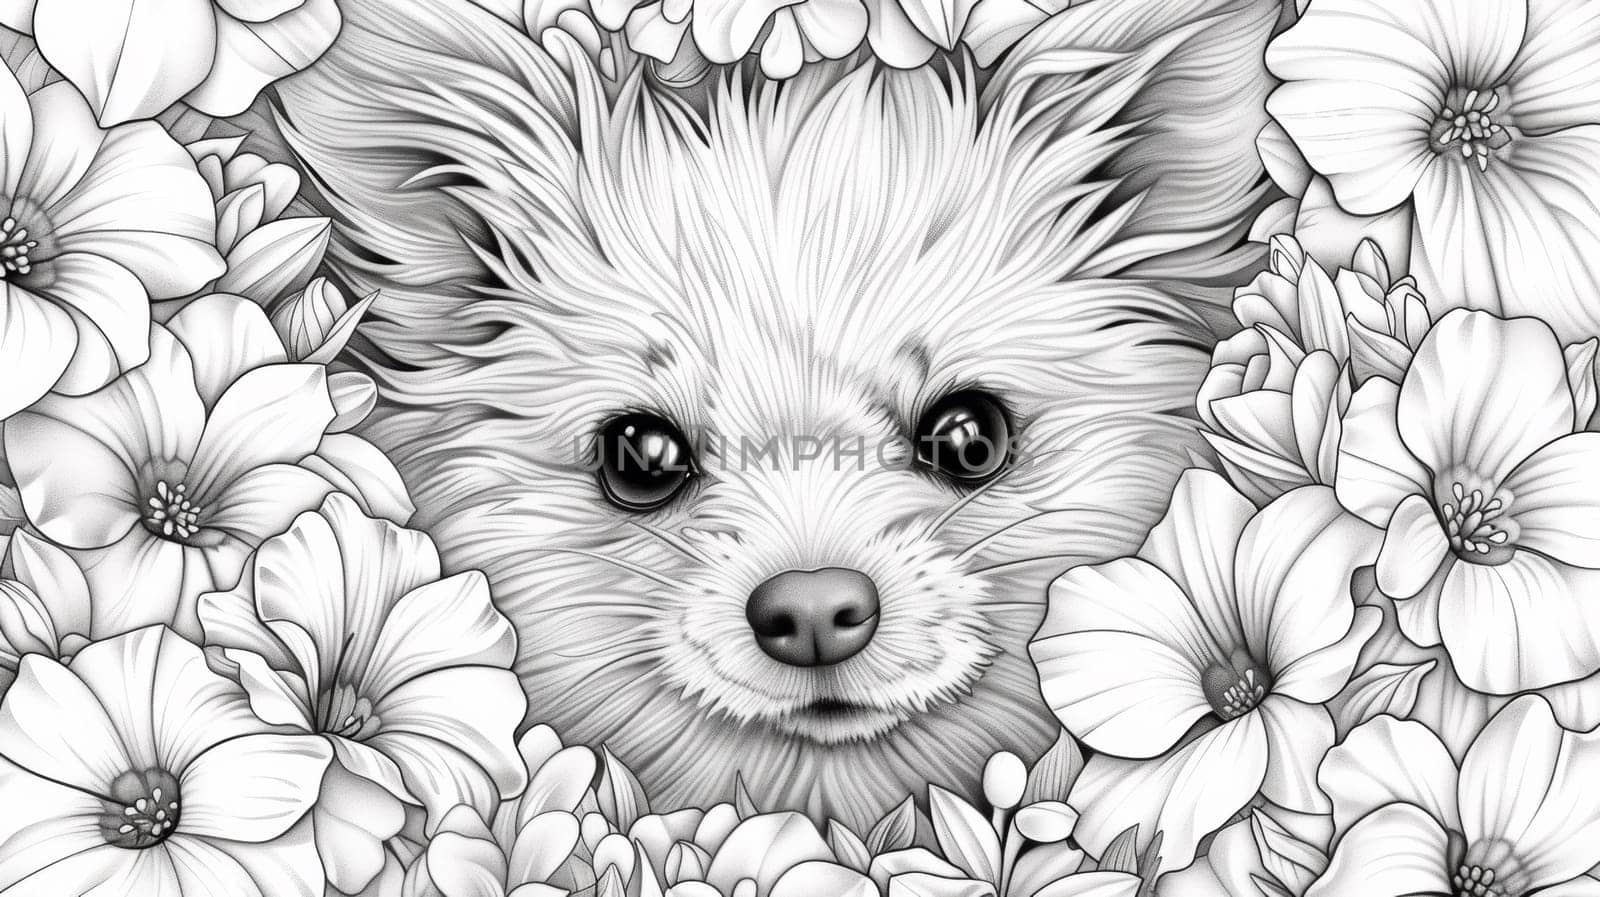 A black and white drawing of a dog surrounded by flowers, AI by starush